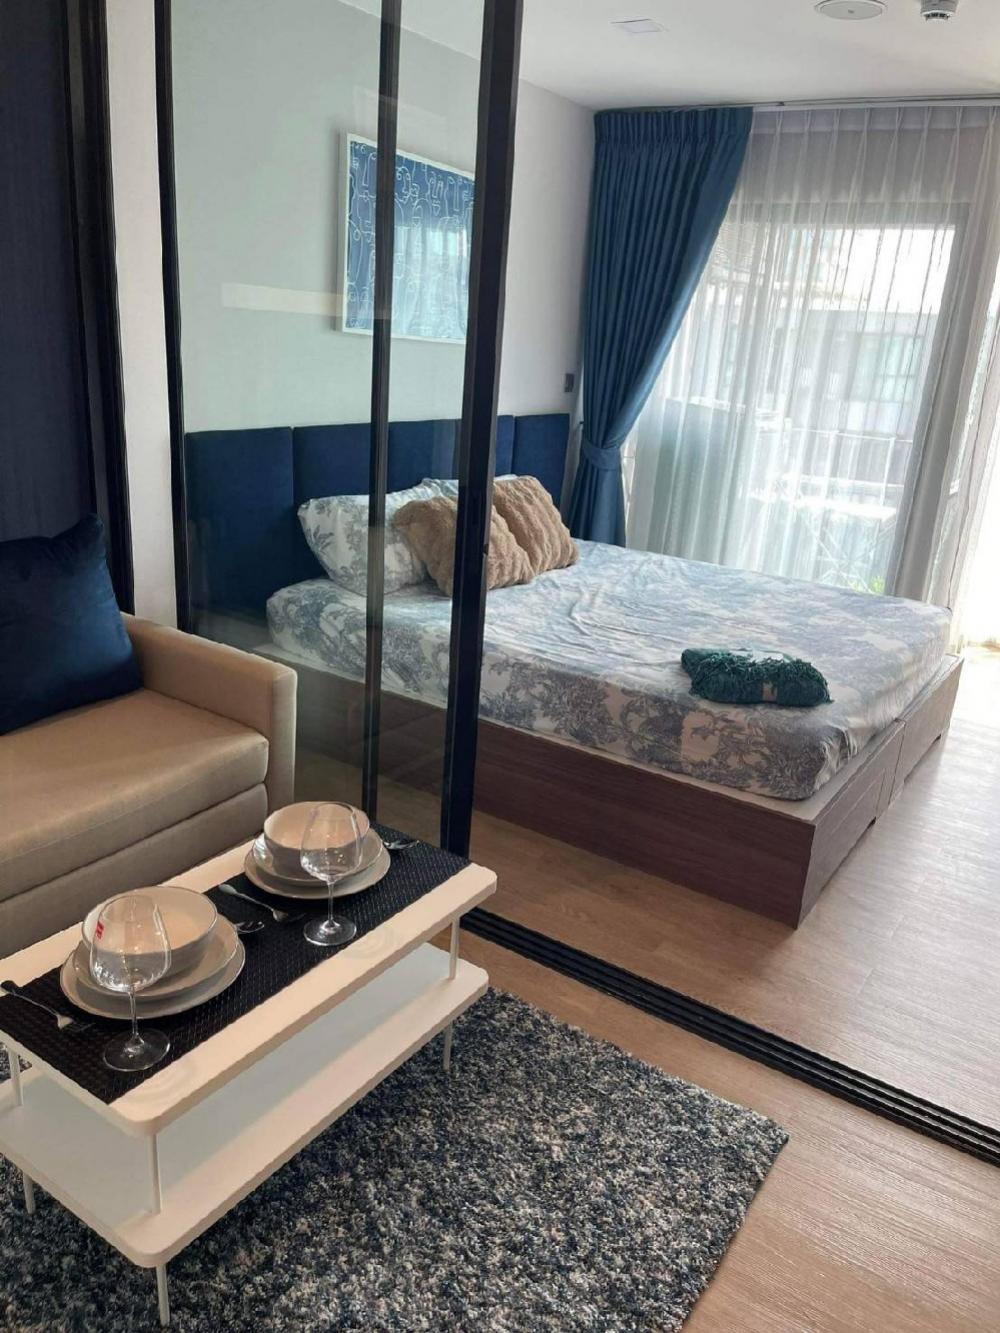 For RentCondoPathum Thani,Rangsit, Thammasat : Condo for rent near Bangkok University, Kave Town Shift project, new room, first hand, beautifully decorated, pool view